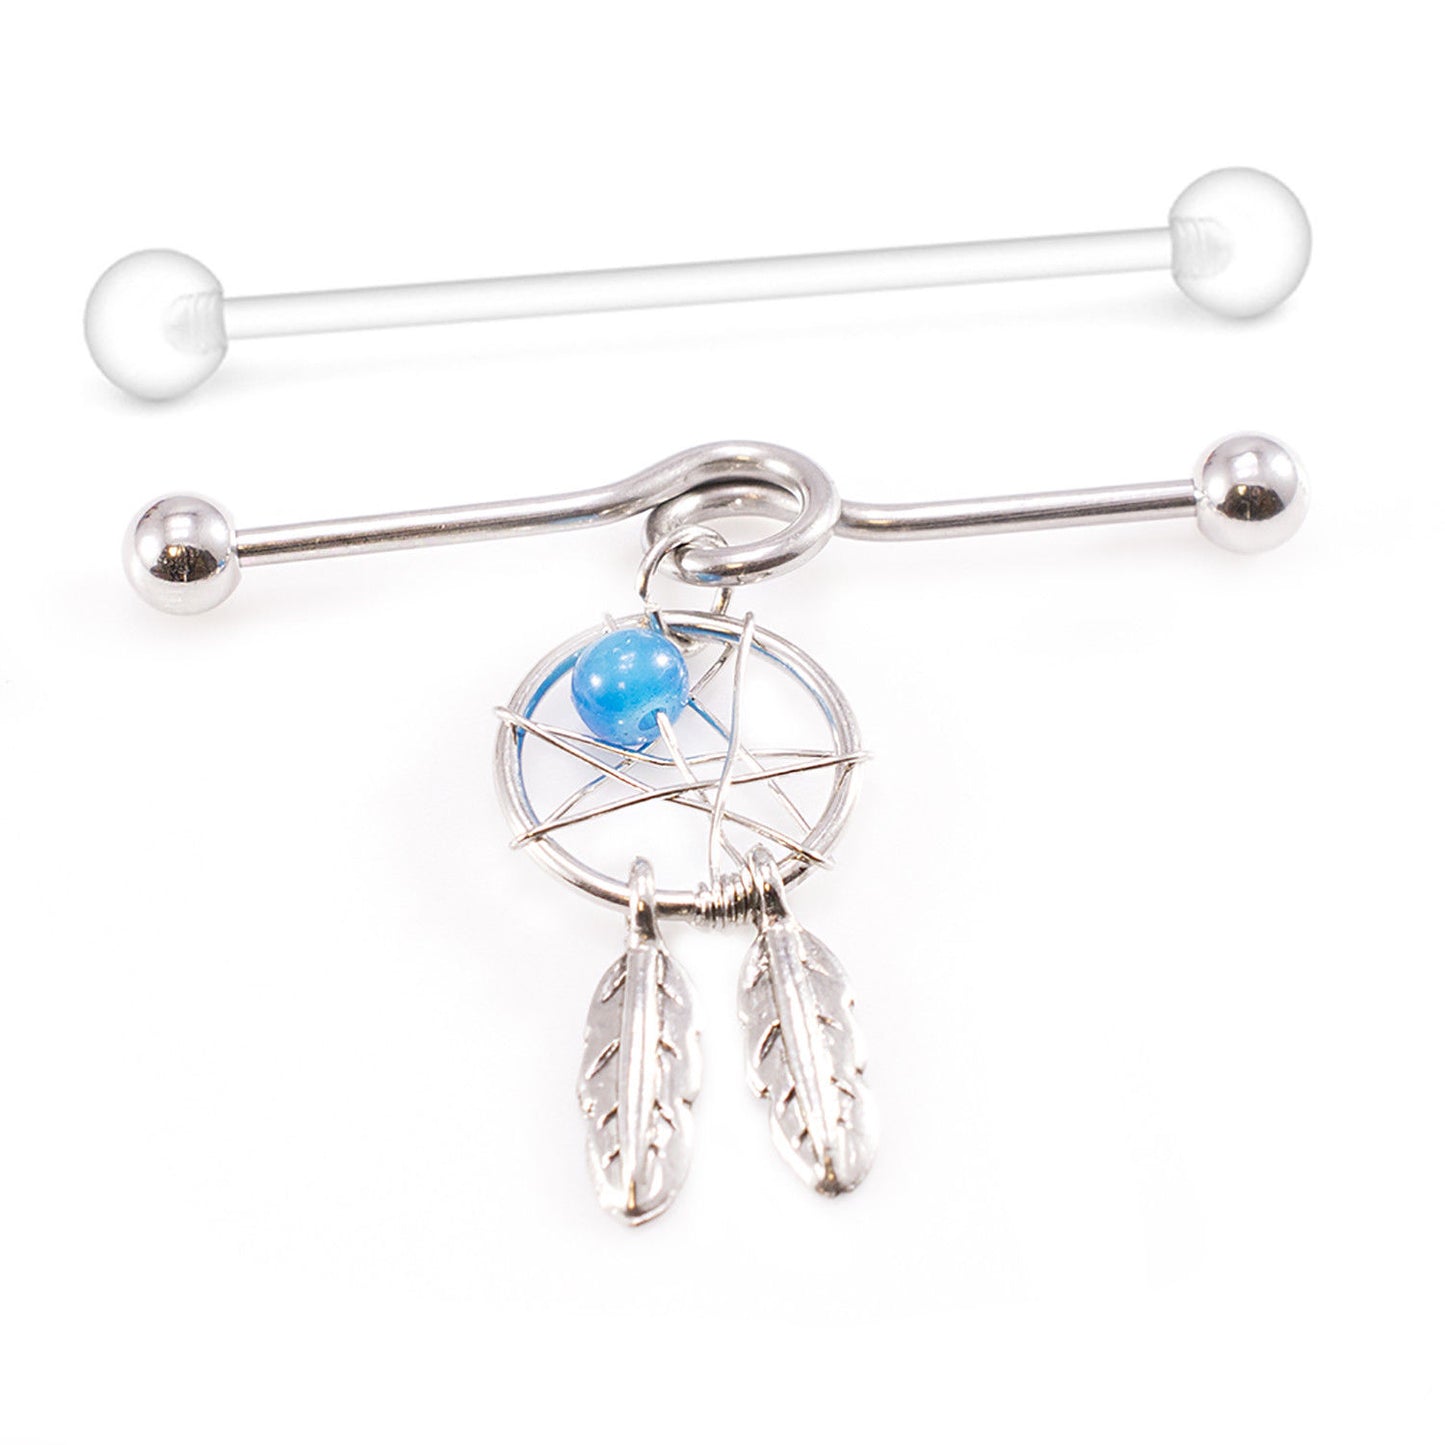 Industrial Barbell with Dream Catcher Dangle and Industrial Retainer 14G 38mm